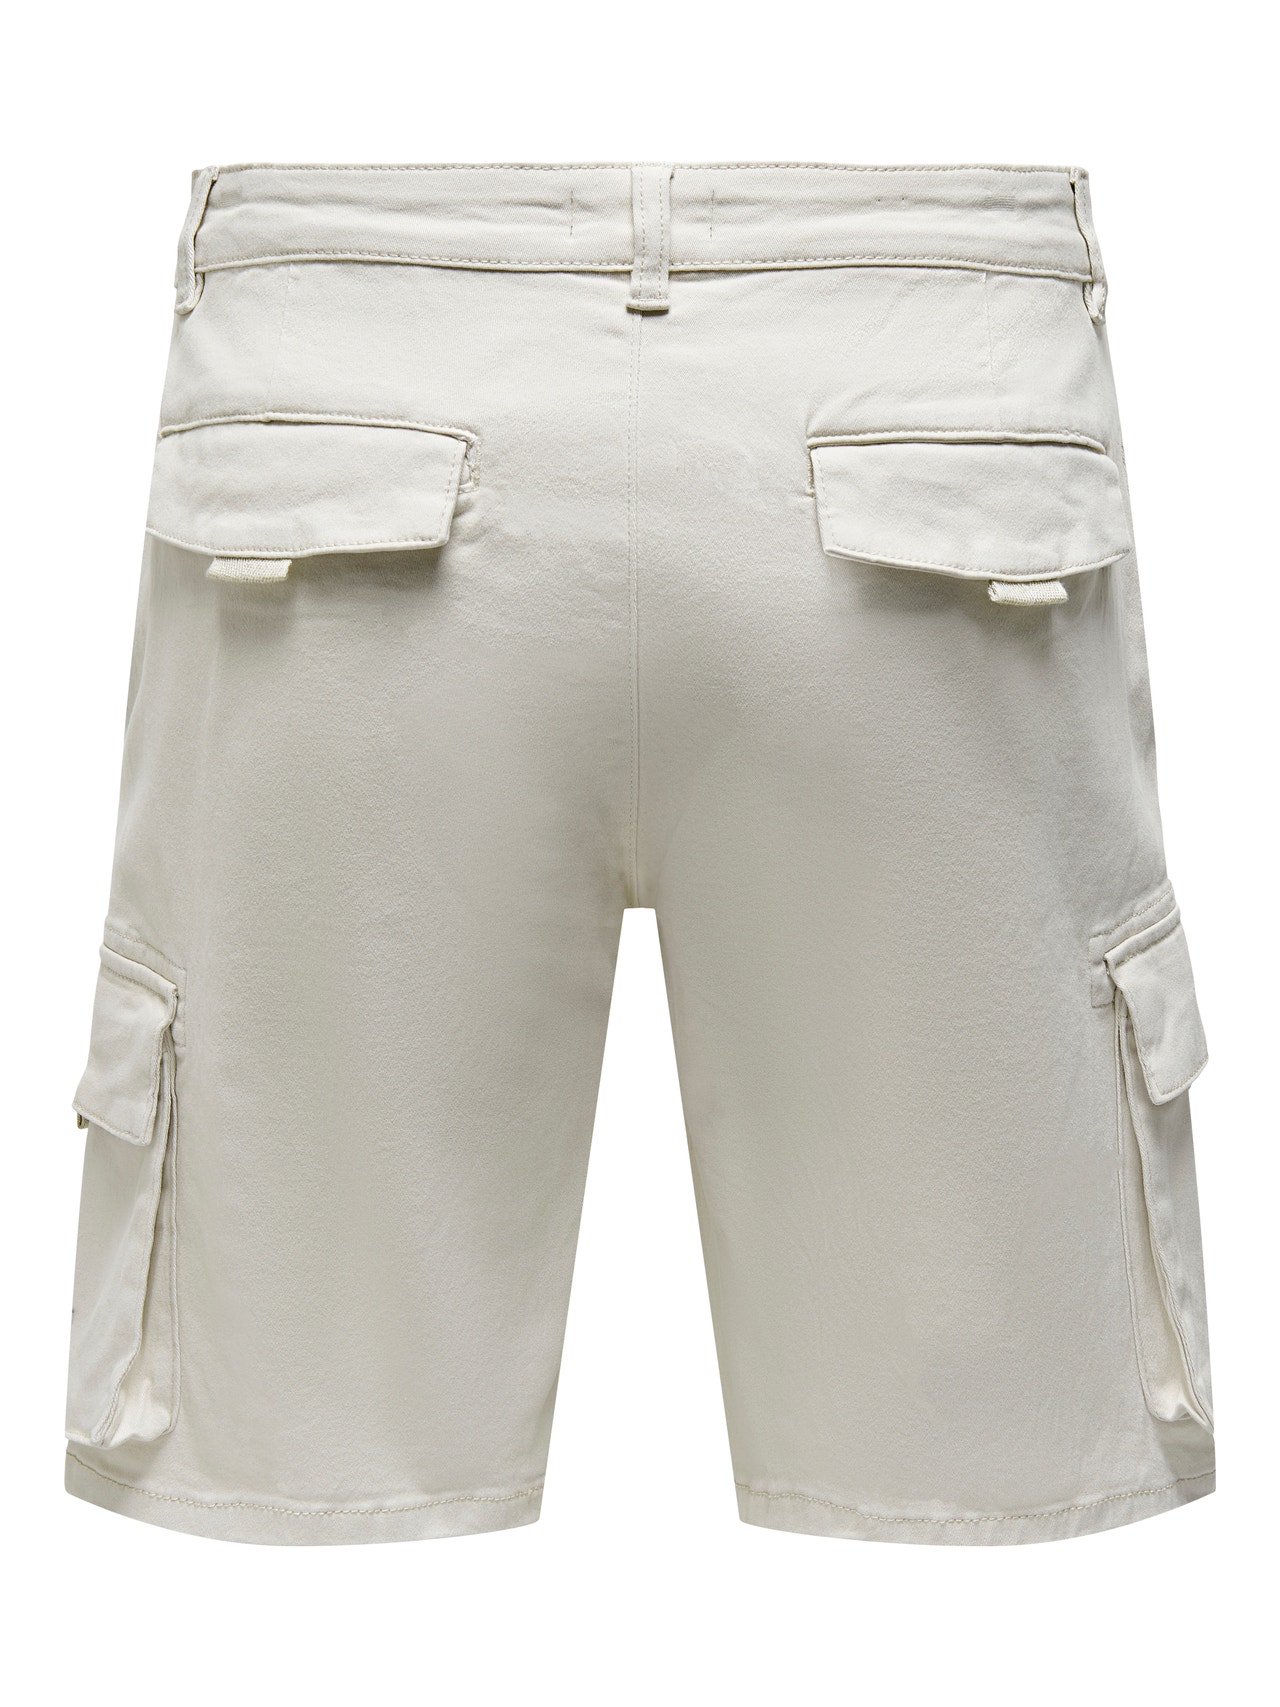 ONLY & SONS Shorts Corte regular Talle medio -Silver Lining - 22024564